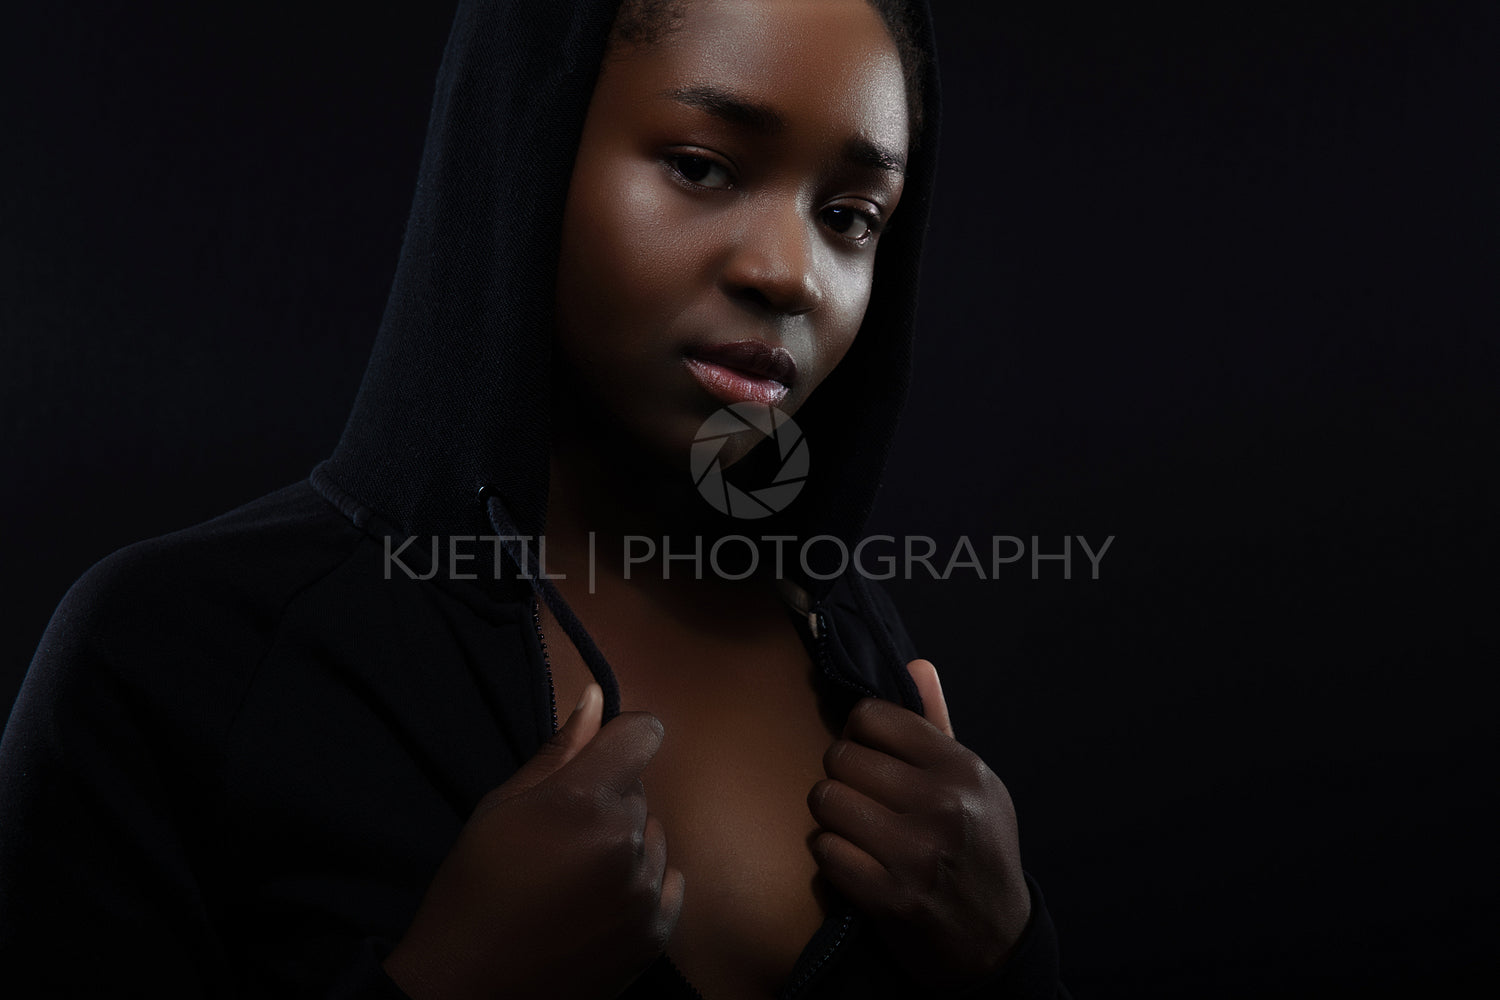 Confident and beautiful woman with dark skin and attitude wearing hoodie